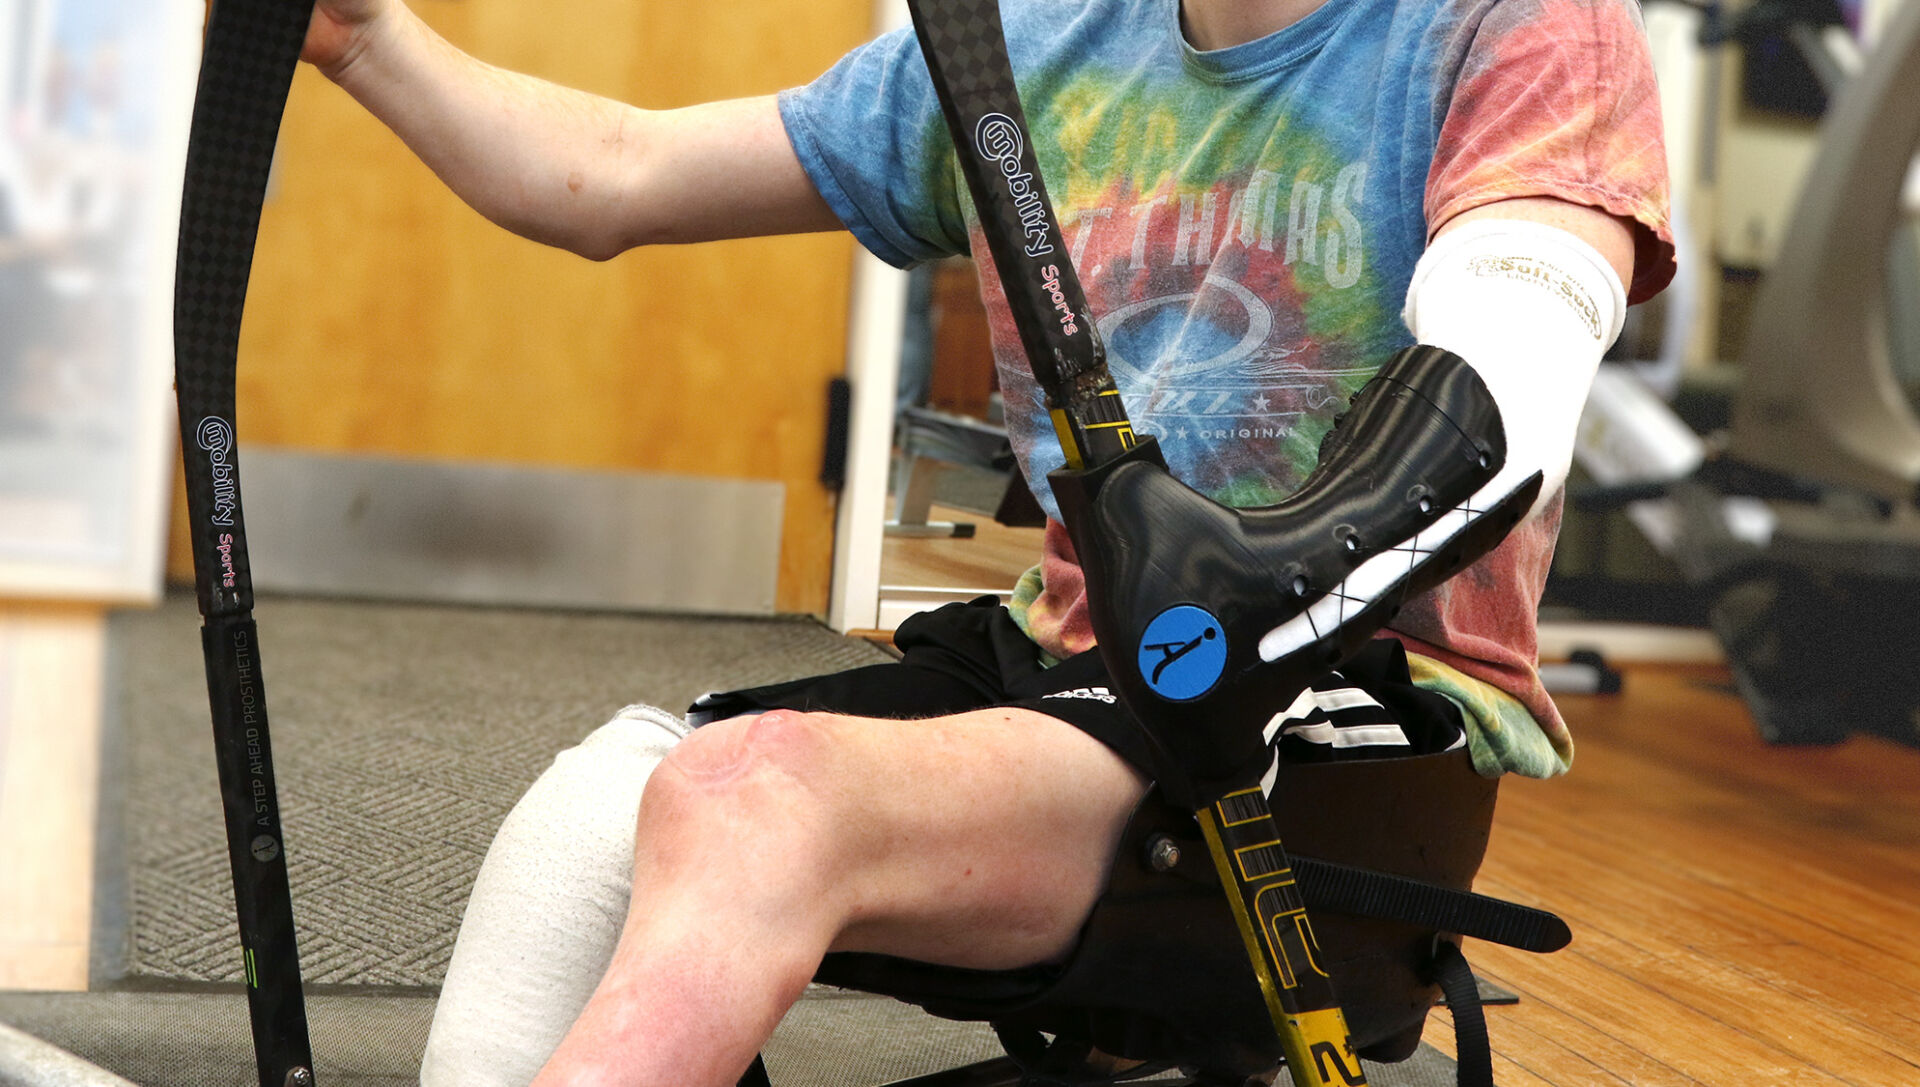 3d printed prosthetic to hold hockey stick